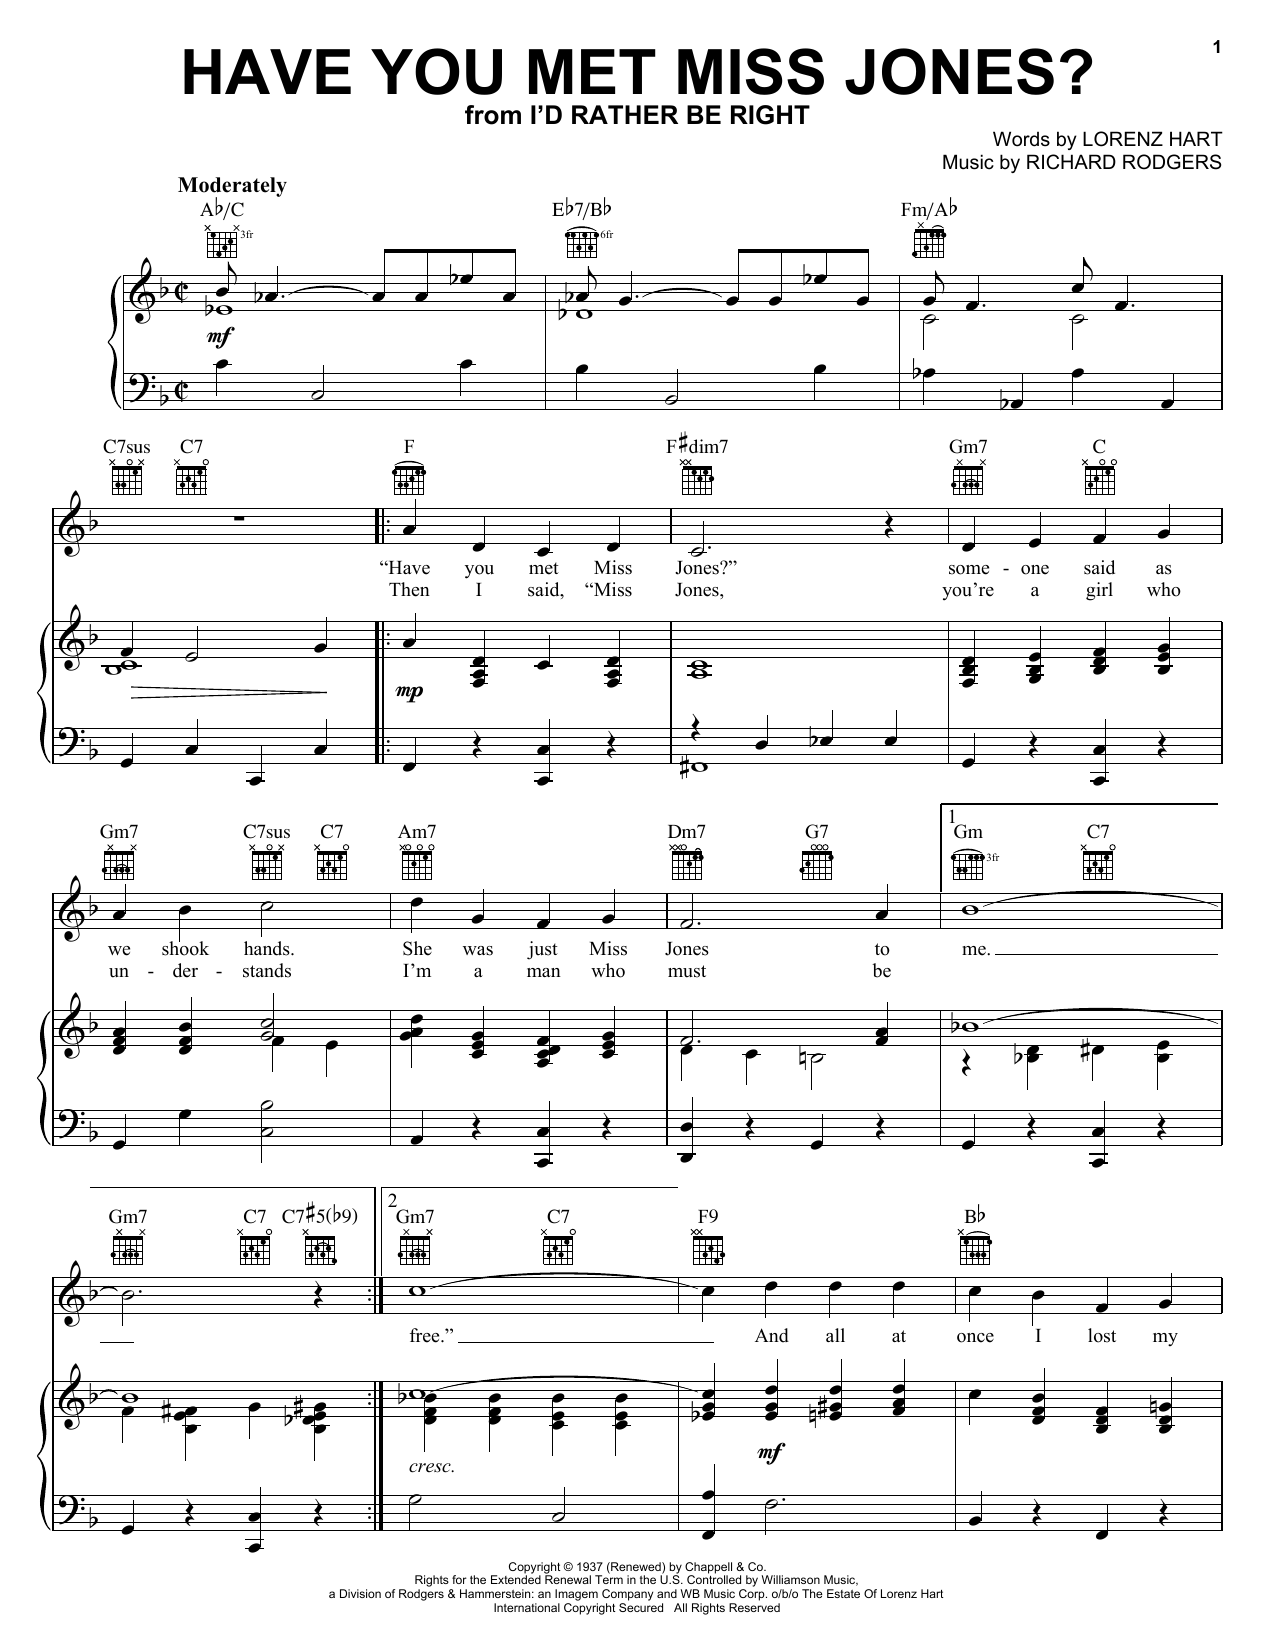 Rodgers & Hart Have You Met Miss Jones? sheet music notes and chords. Download Printable PDF.